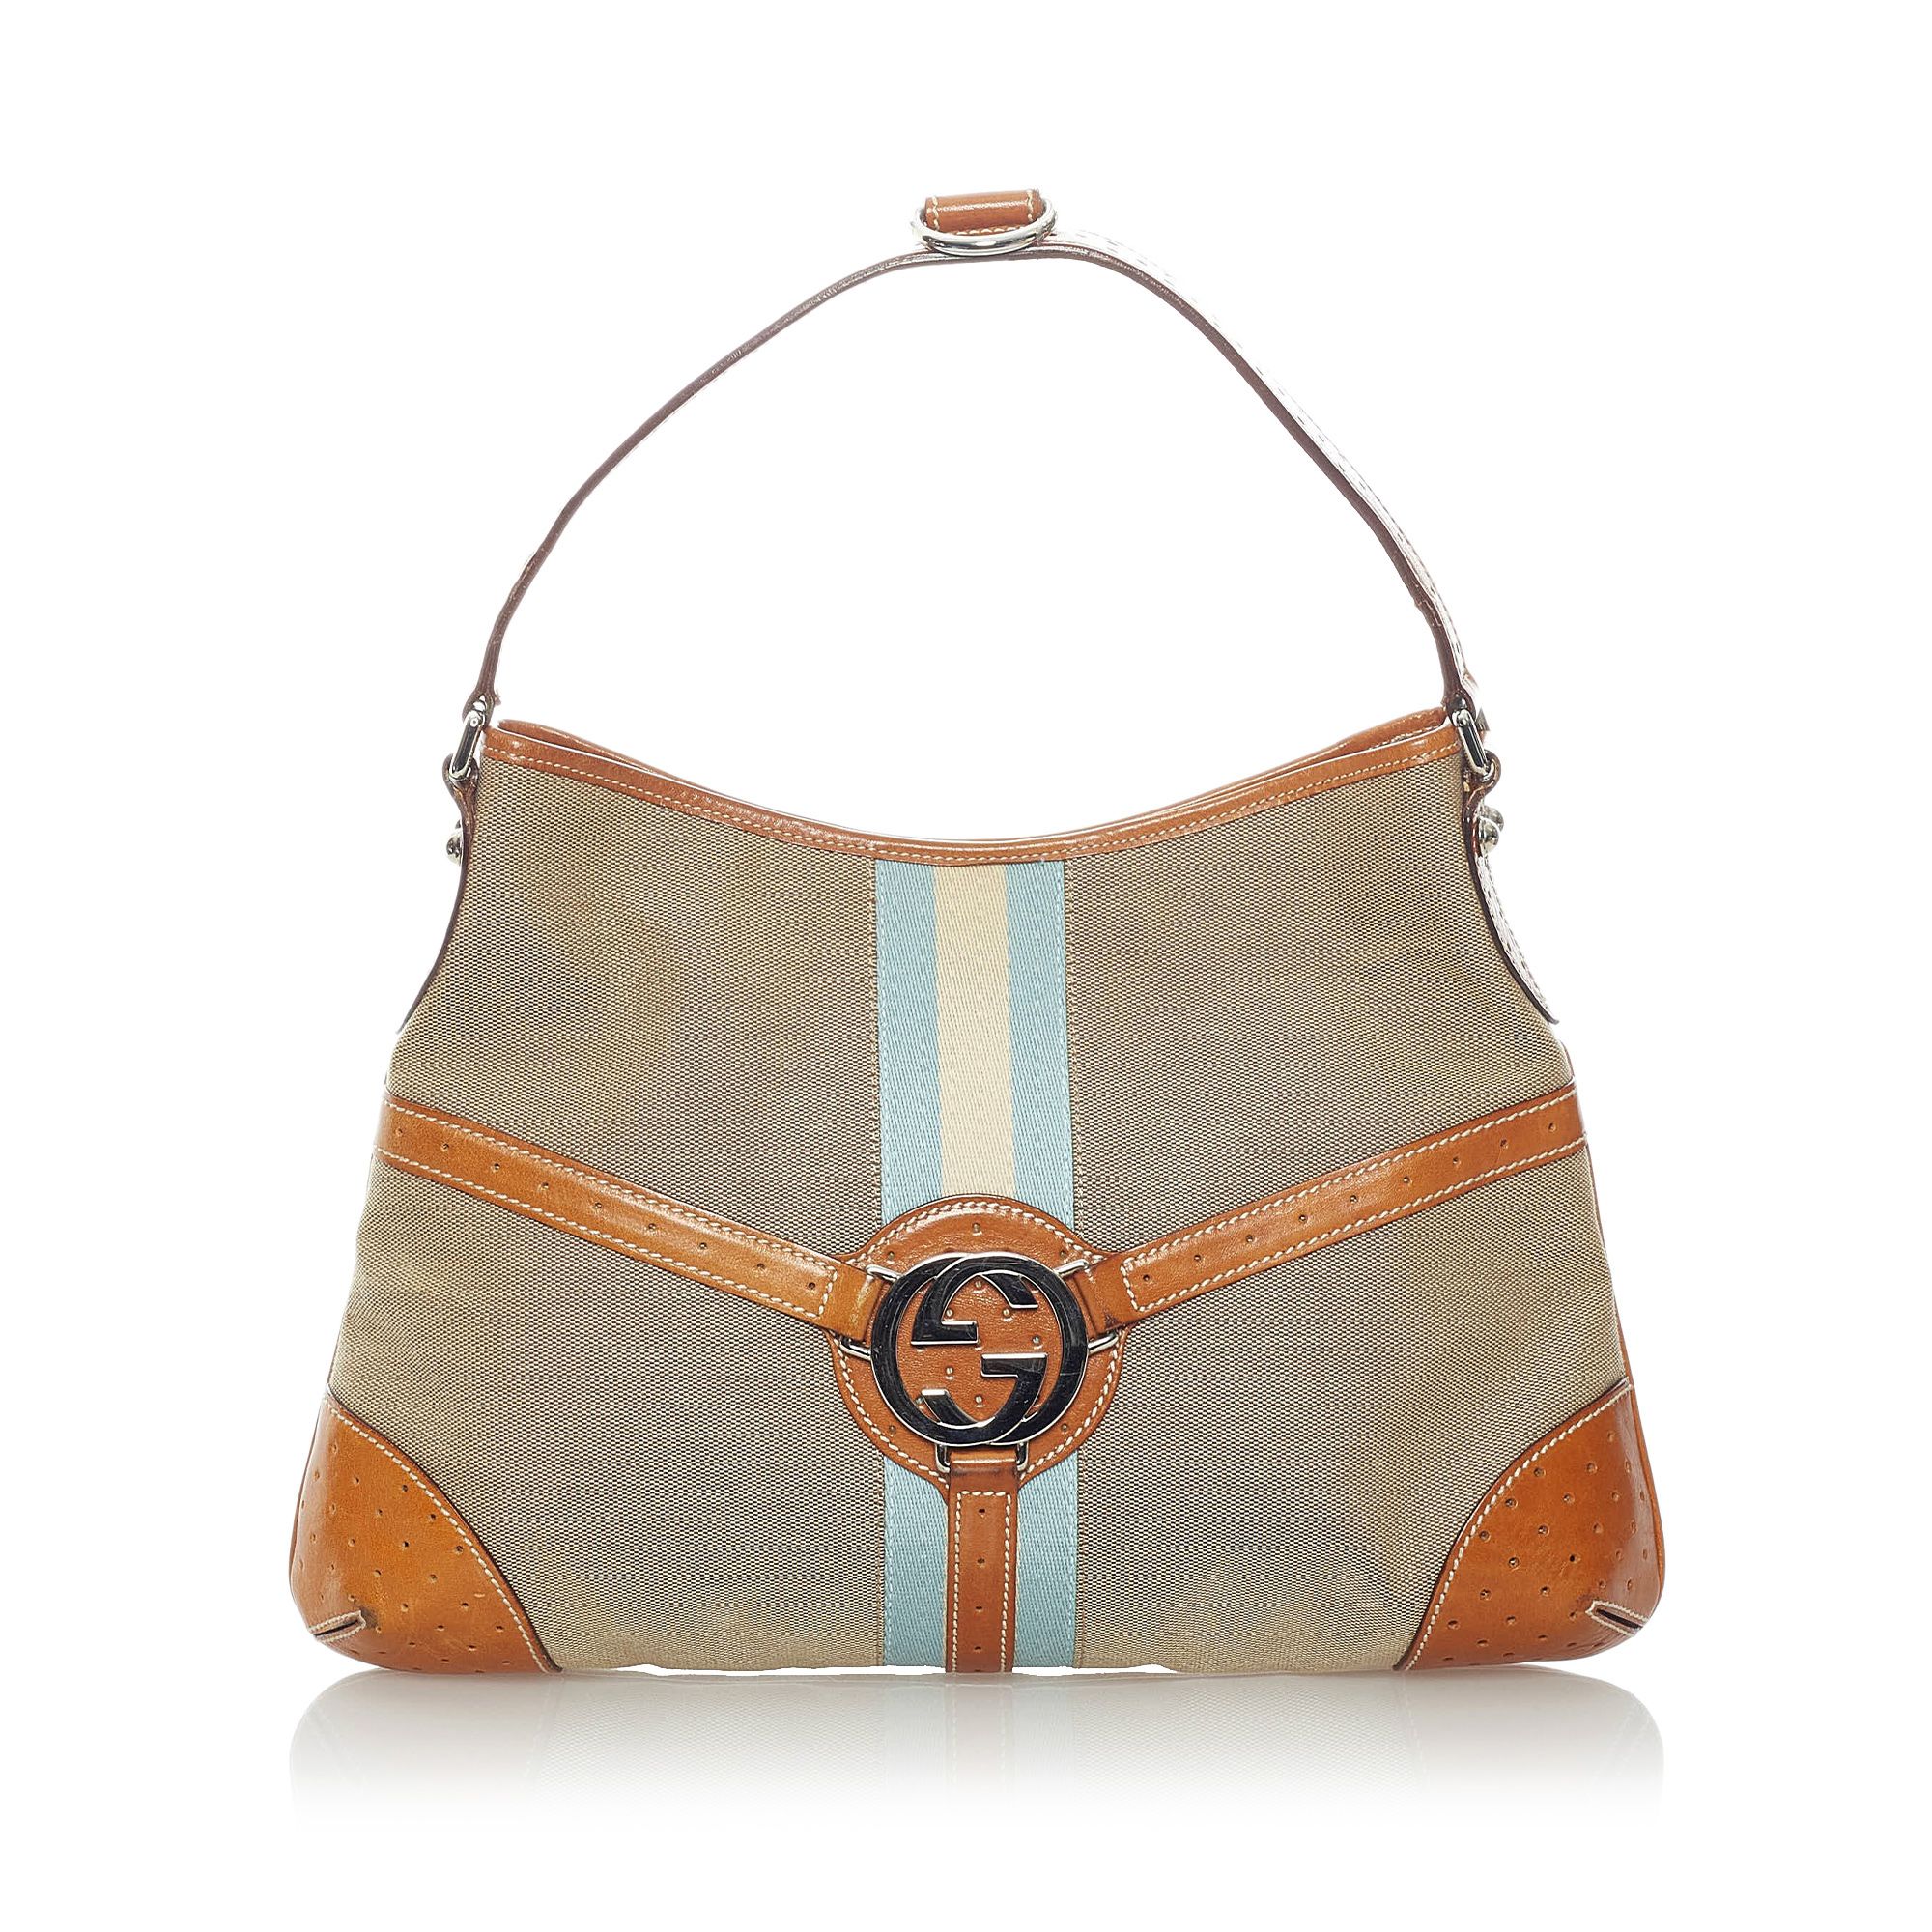 VINTAGE. RRP AS NEW. The Reins hobo features a canvas body, a front exterior leather trim with double G logo, a flat leather handle, a top zip closure, and an interior zip pocket.Exterior back is discolored, out of shape and scratched. Exterior bottom is discolored, out of shape and scratched. Exterior front is discolored, out of shape, scratched and stained with others. Exterior handle is discolored, out of shape, scratched and stained with others. Exterior side is discolored, out of shape and scratched. Buckle is scratched. Lock is scratched. Studs is scratched.

Dimensions:
Length 24cm
Width 35cm
Depth 2cm
Shoulder Drop 15cm

Original Accessories: Dust Bag

Serial Number: 114879
Color: Brown x Light Brown x Multi
Material: Fabric x Canvas x Leather x Calf
Country of Origin: Italy
Boutique Reference: SSU164765K1342


Product Rating: FairCondition

Certificate of Authenticity is available upon request with no extra fee required. Please contact our customer service team.